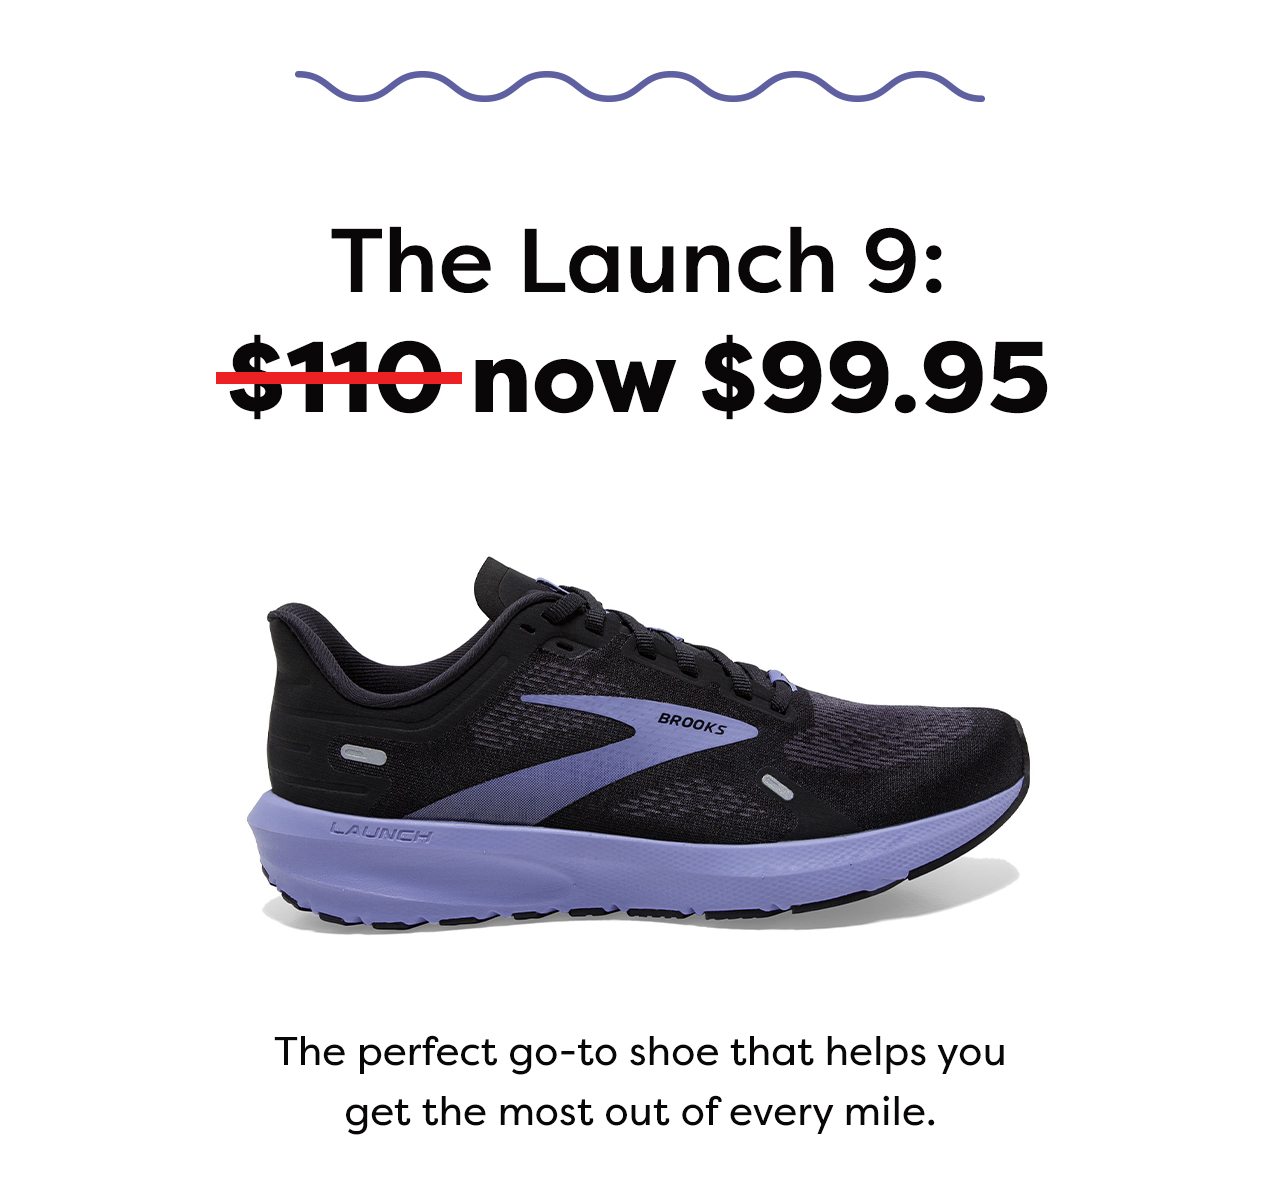 The Launch 9: now $99.95 - The perfect go-to shoe that helps you get the most out of every mile.